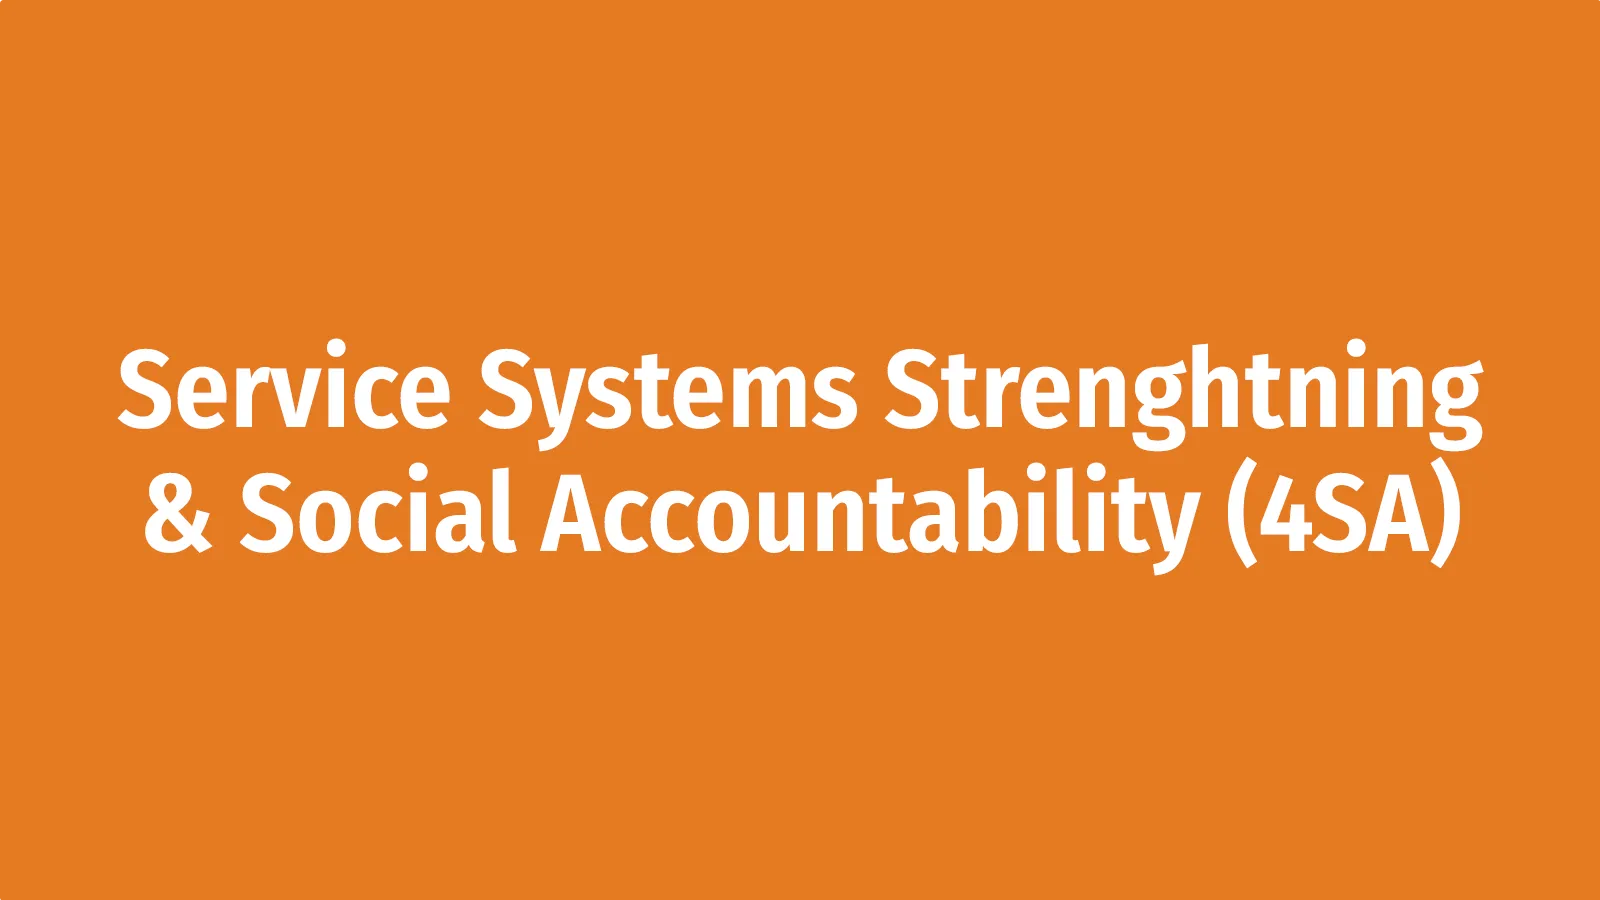 Service Systems Strengthening and Social Accountability (4SA)